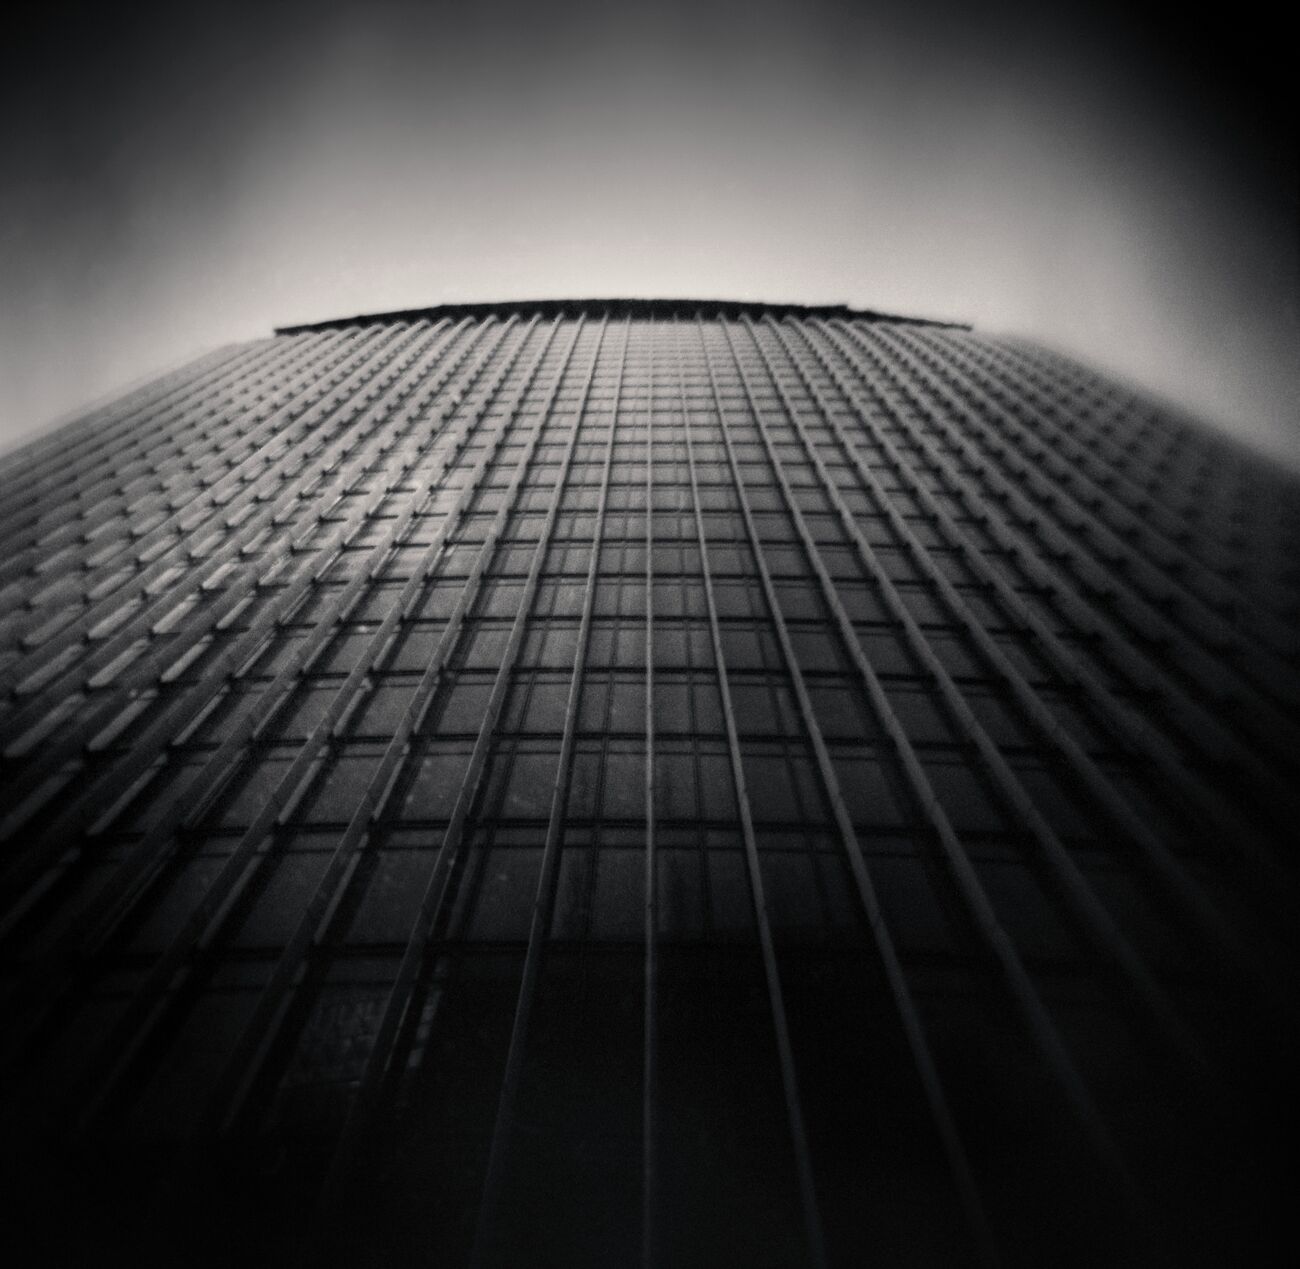 20 Fenchurch Street (The Walkie-Talkie), The City, London, Angleterre. Avril 2014. Ref-1360 - Denis Olivier Photographie